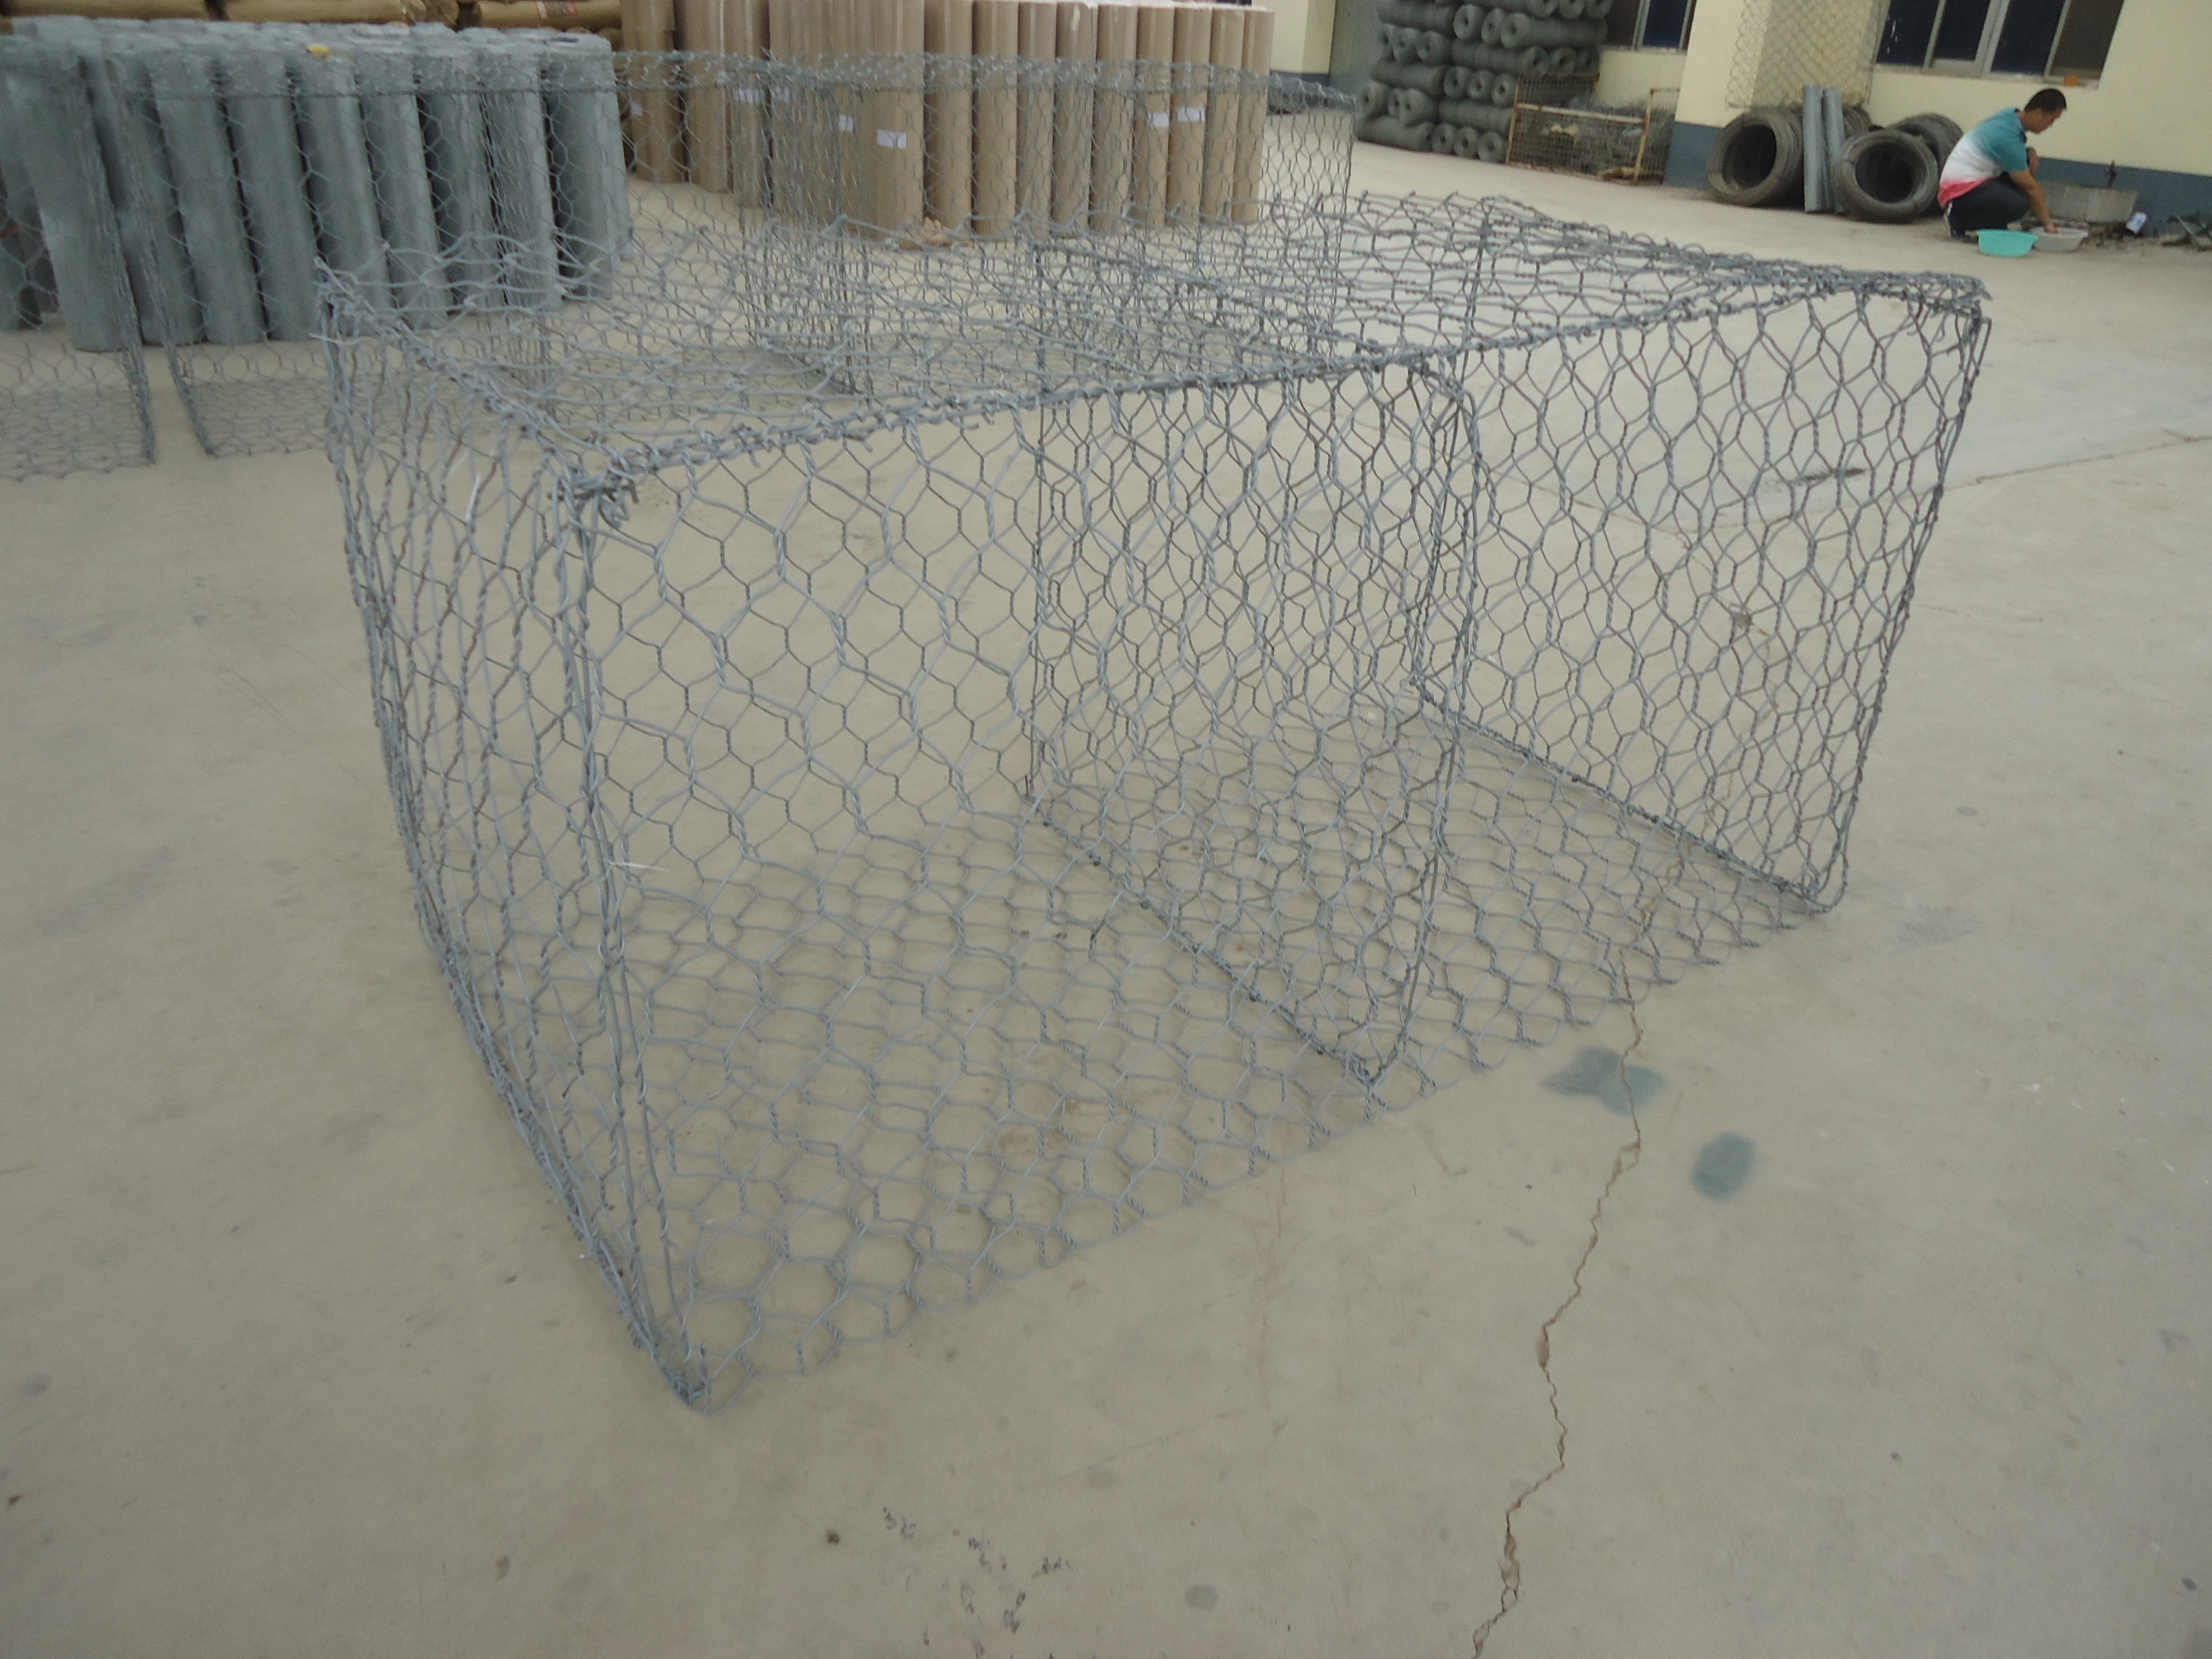 How to assemble gabion box and mattress?